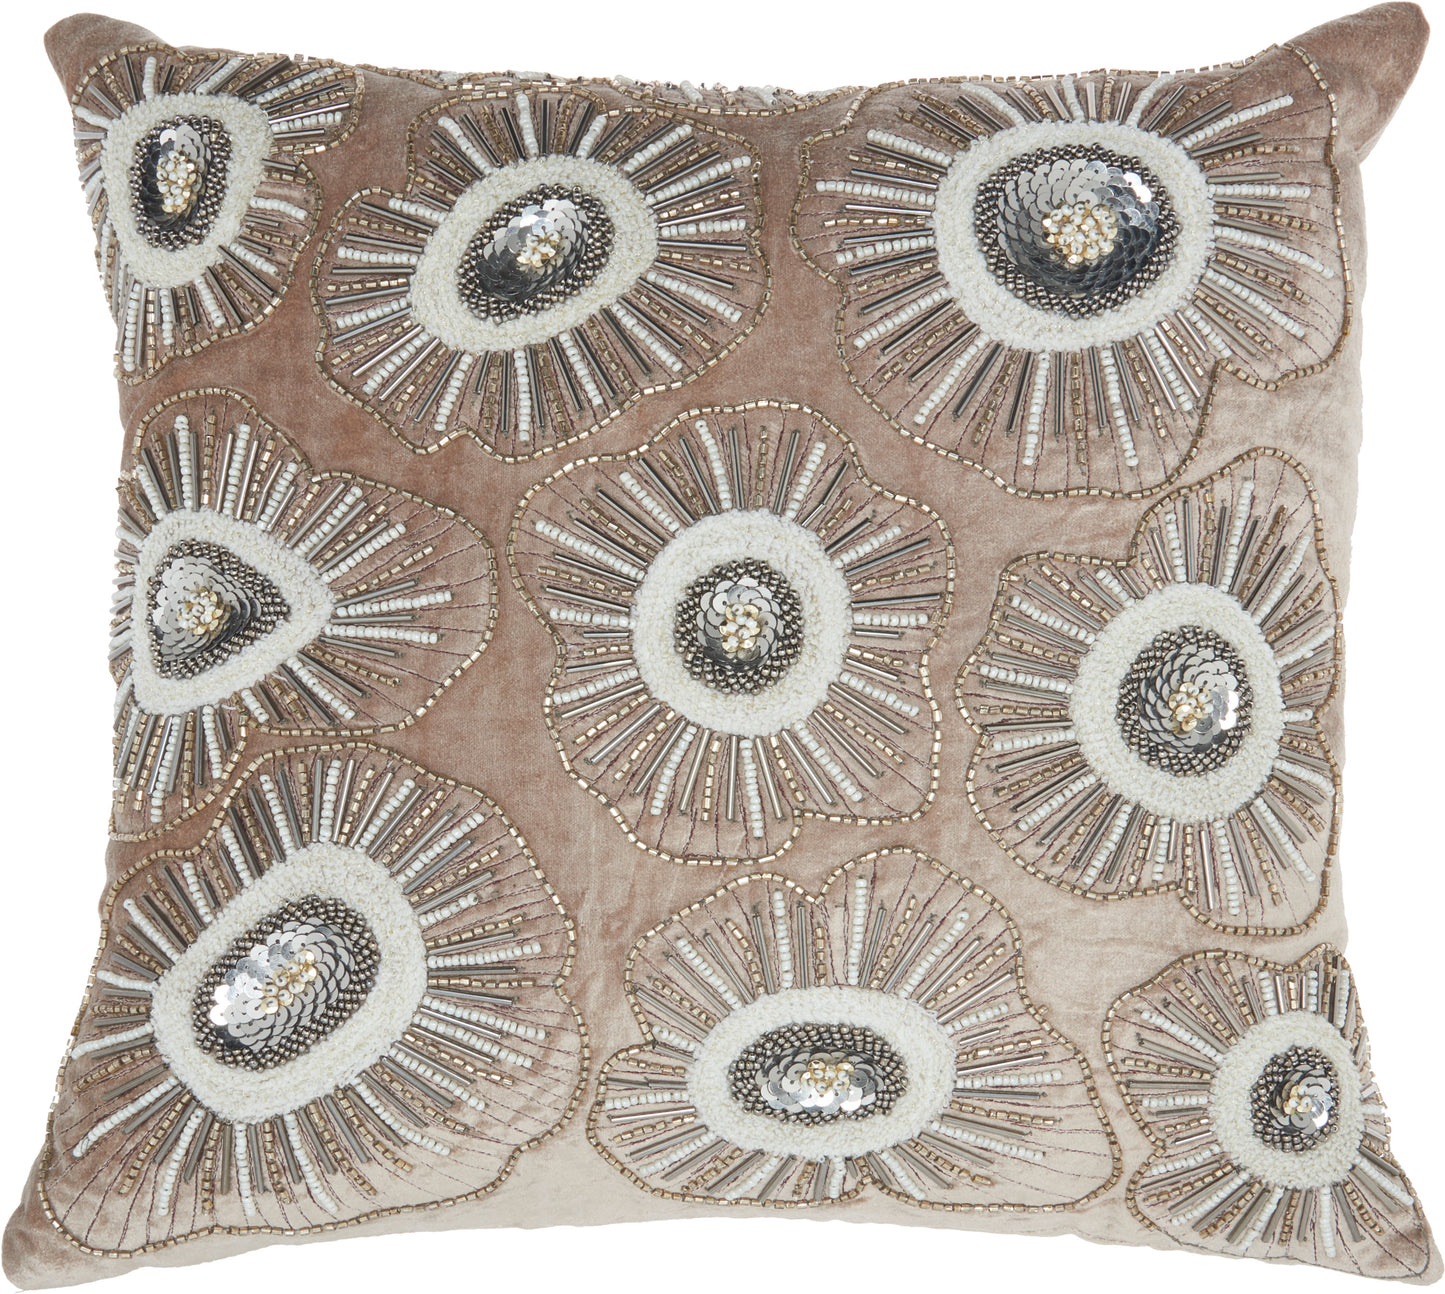 Luminescence E1169 Velvet Beaded Flower Blosso Throw Pillow From Mina Victory By Nourison Rugs